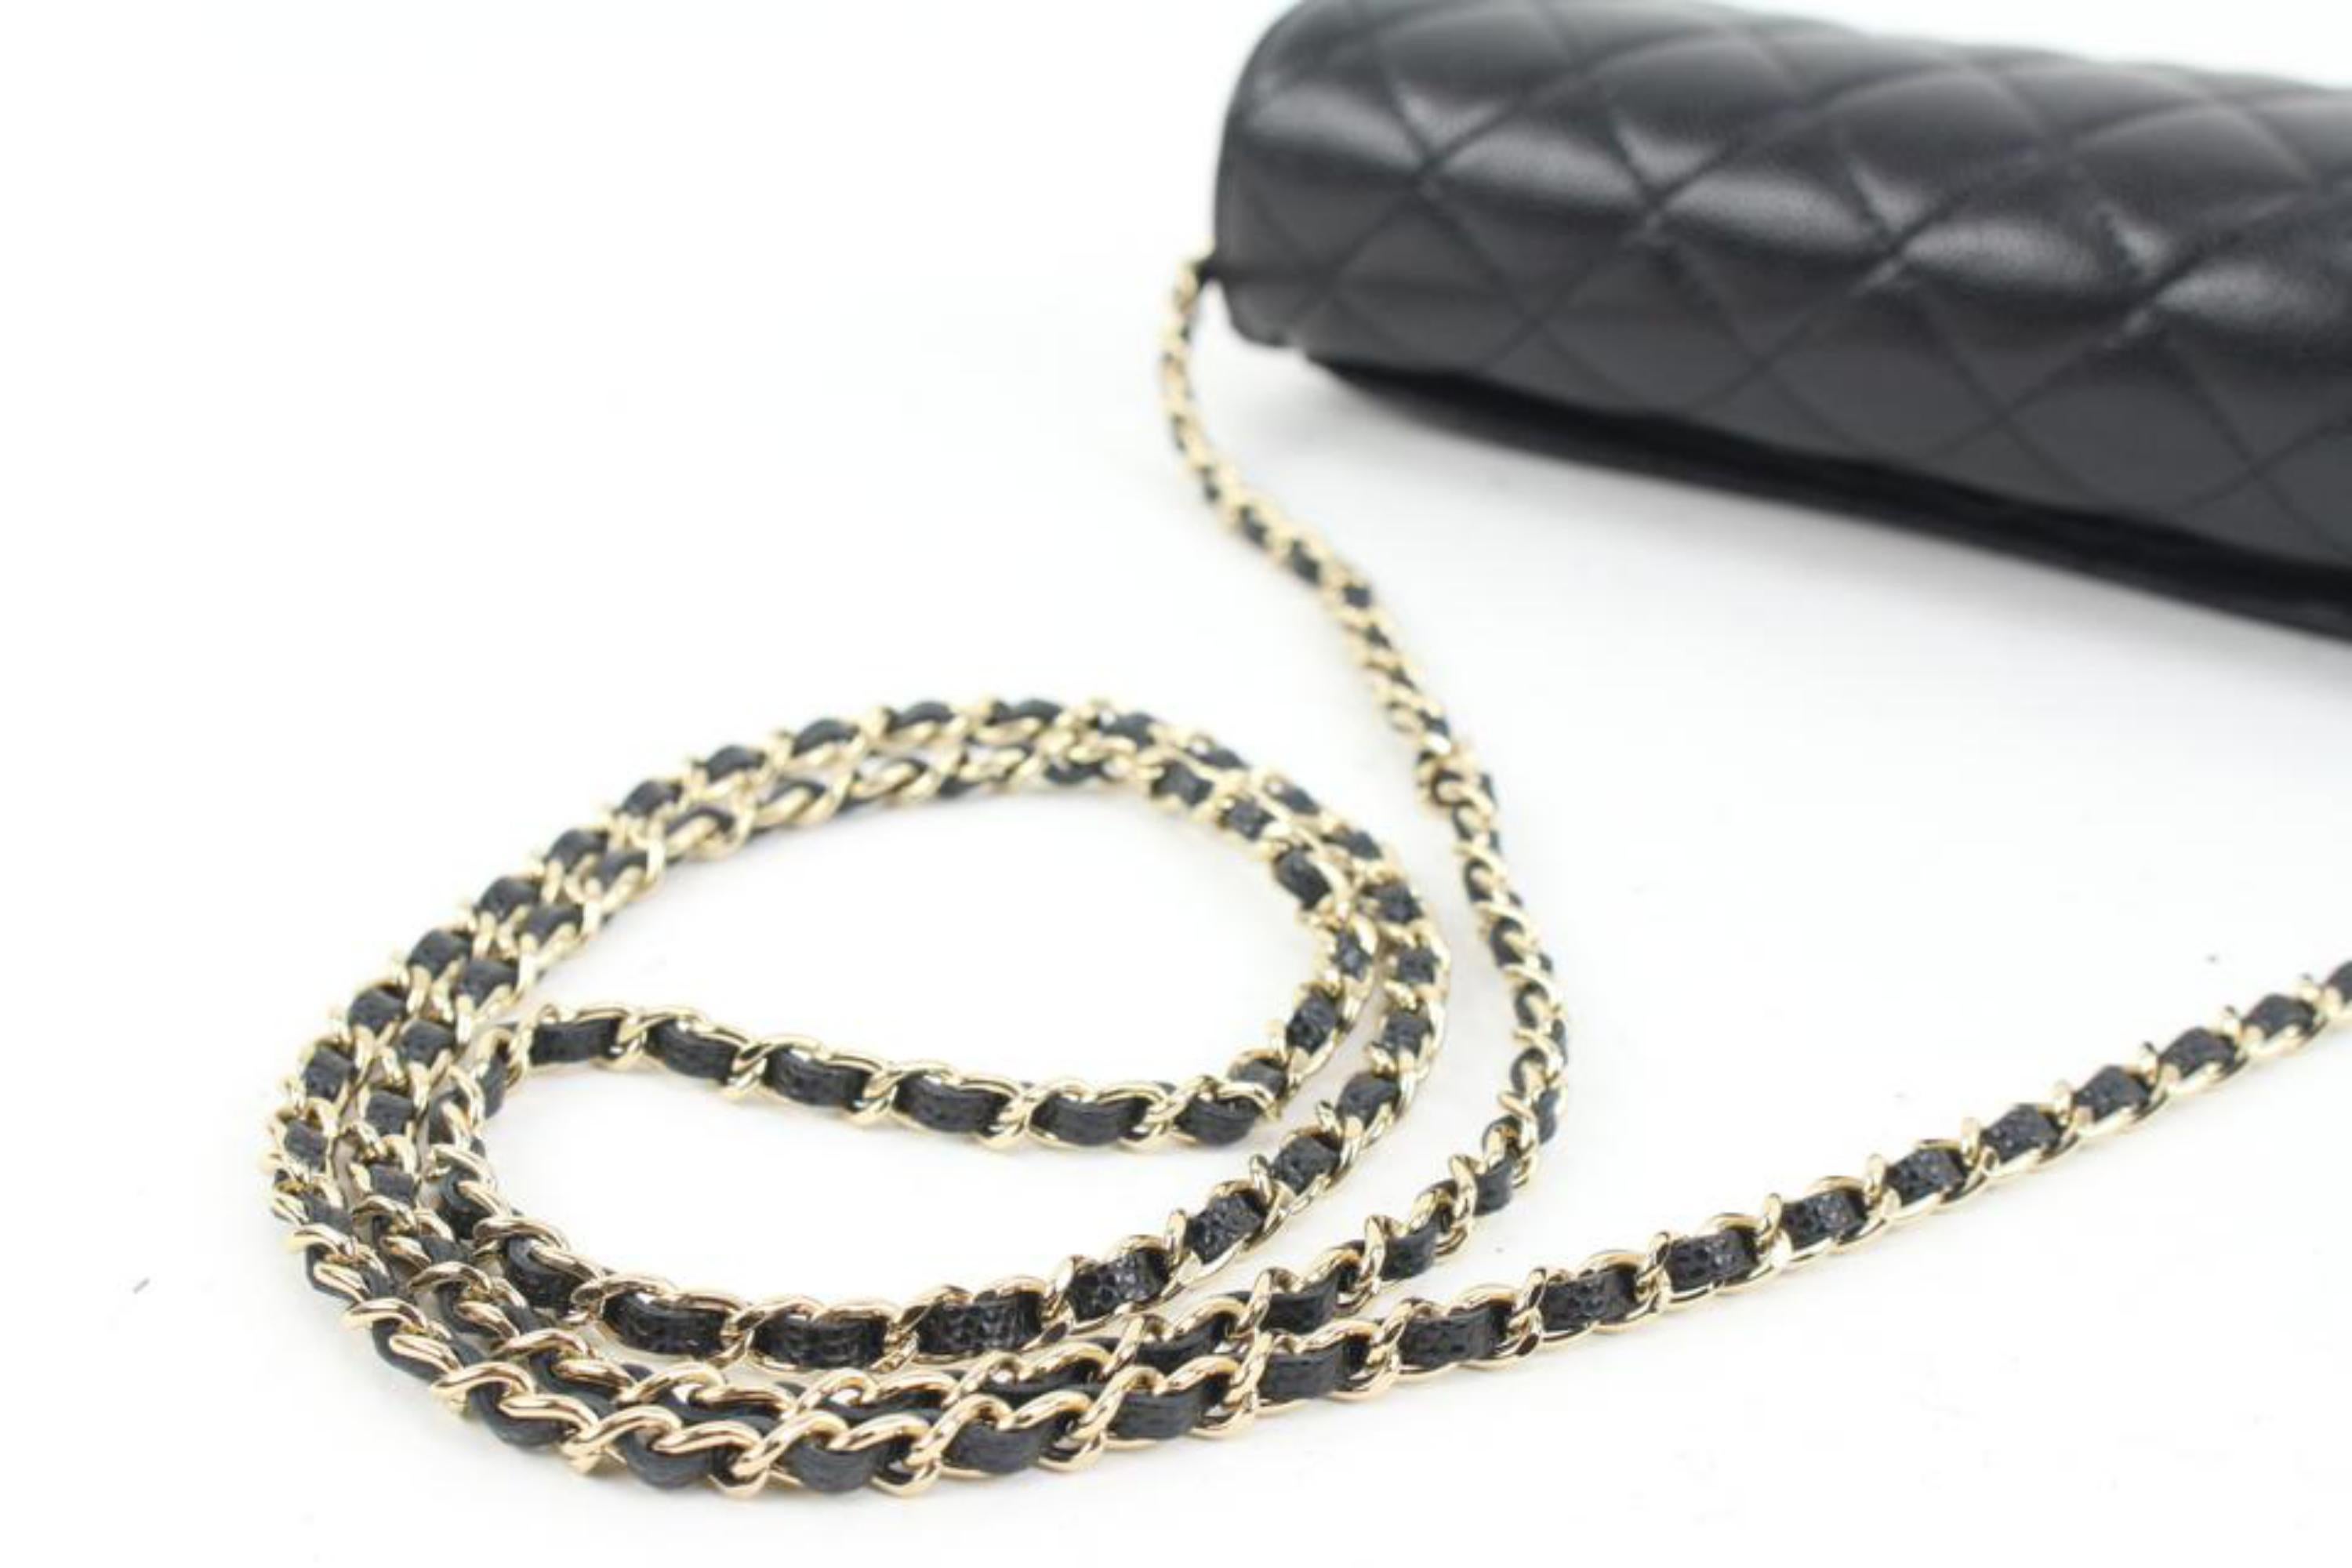 Chanel 22C Black Quilted Caviar Mini Classic Flap Gold Chain Bag 7cas215 2